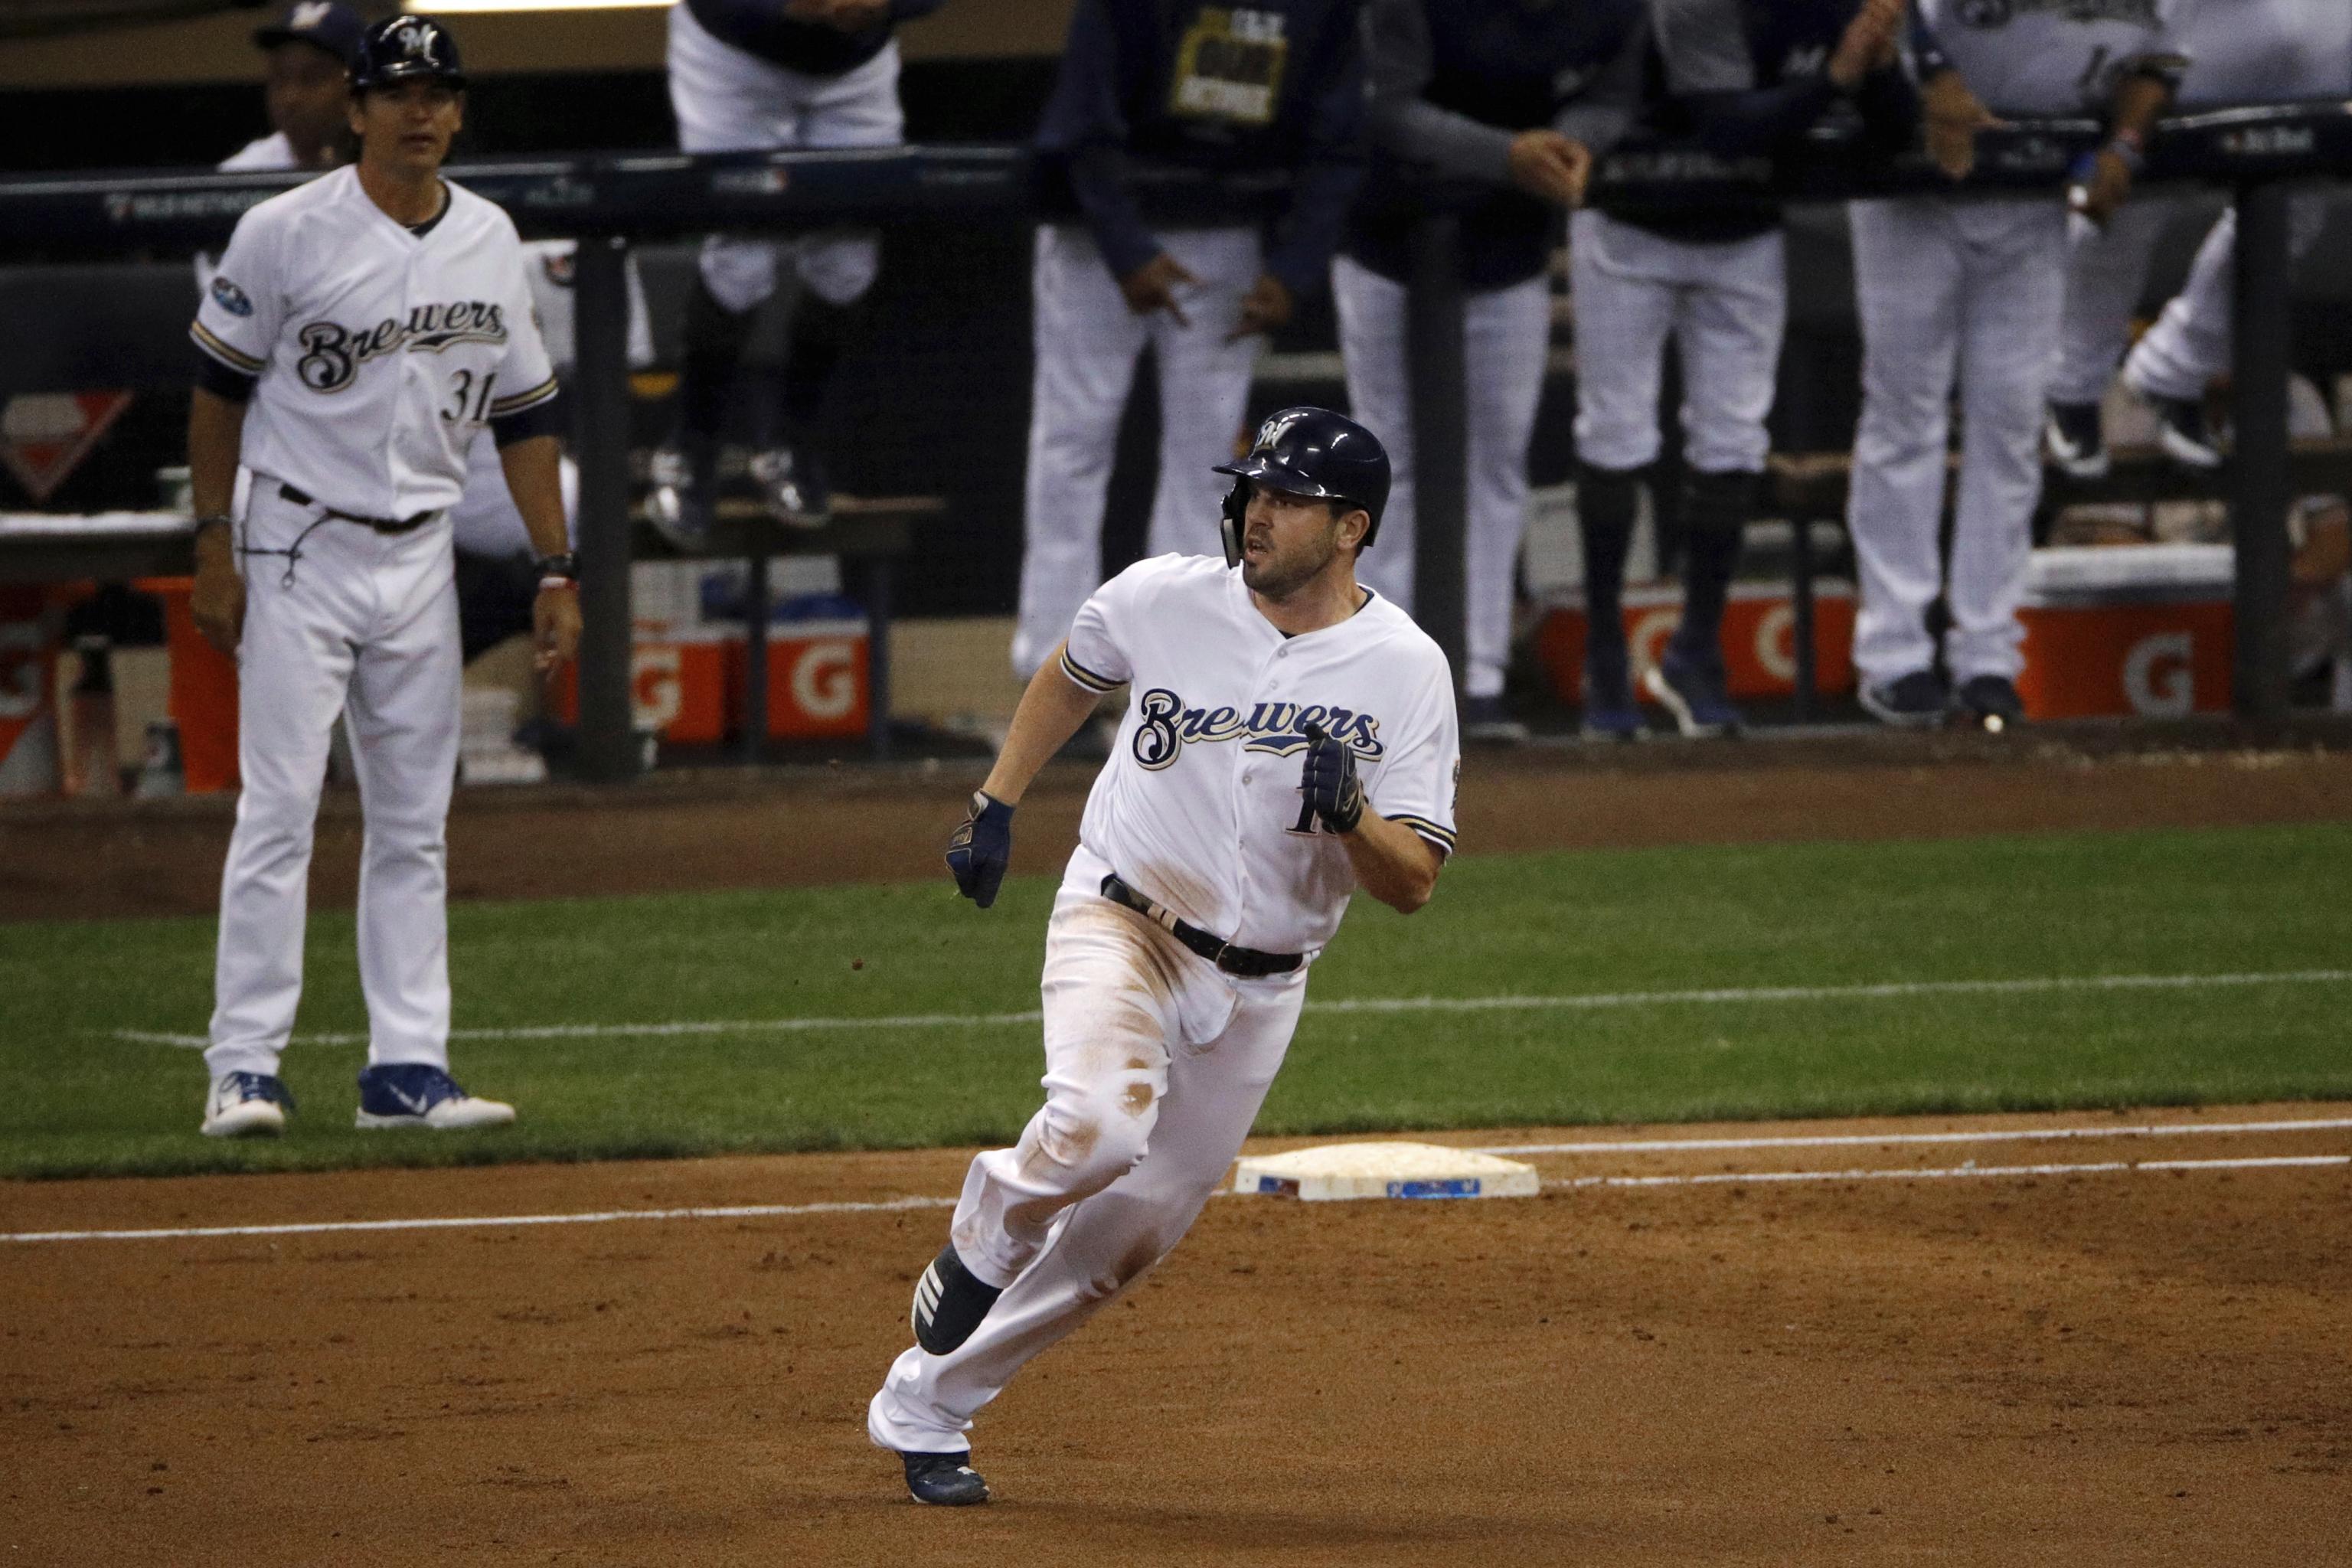 Report: Mike Moustakas returns to Milwaukee Brewers on one-year